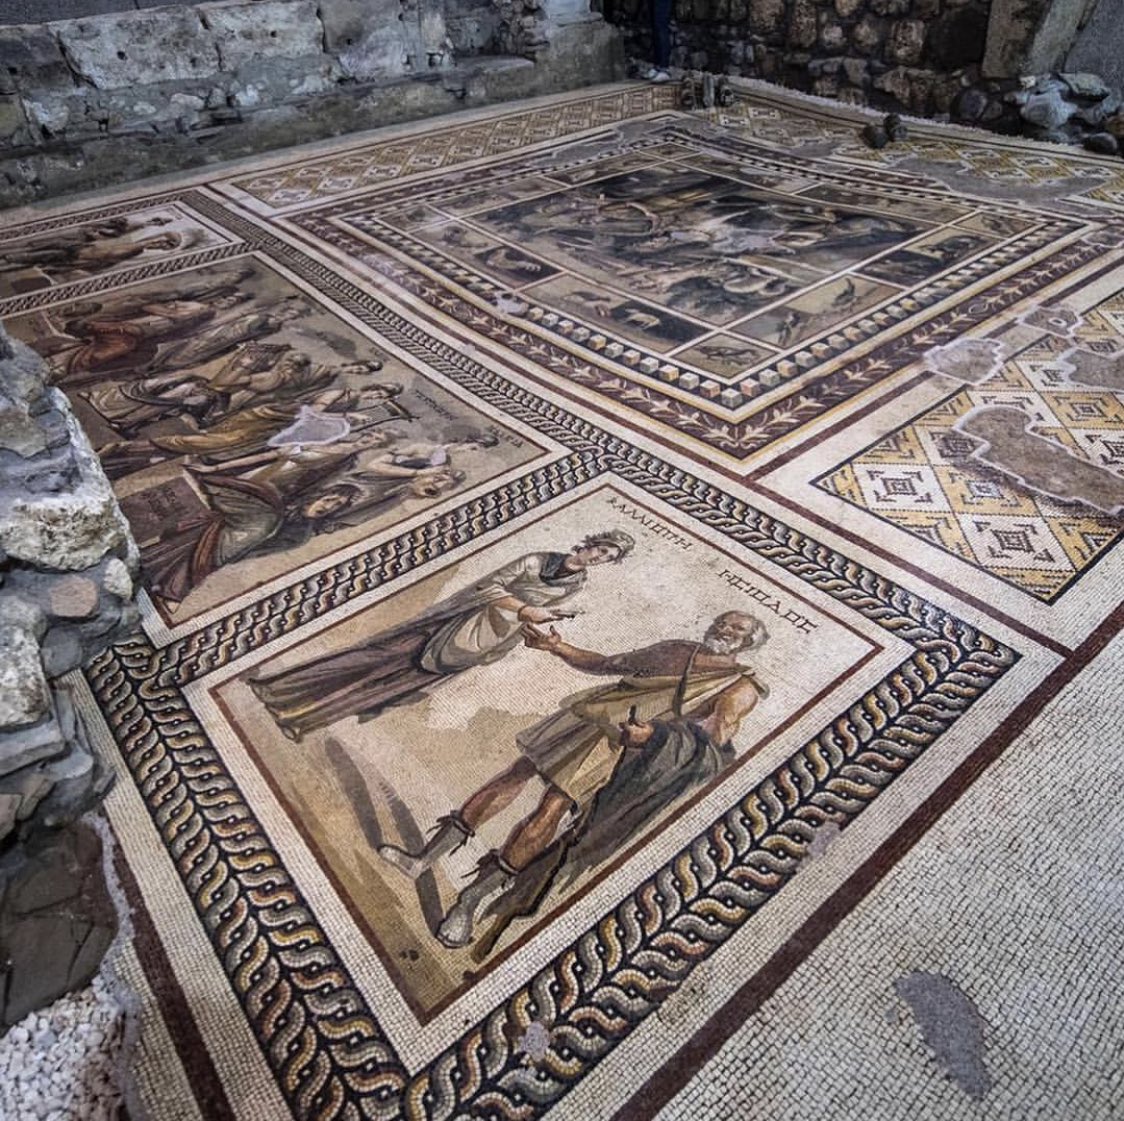 The details of some of the other 10,000 sq. metres of mosaics at the Antakya Museum Hotel archaeological site in Turkey are just stunning. What an astonishing collection.Photographs via Instagram:  https://instagram.com/themuseumhotelantakya?utm_source=ig_profile_share&igshid=r7oitw9gsmh9; &  https://www.instagram.com/p/BuqSIDClJpN/?utm_source=ig_share_sheet&igshid=1jshc9c5ruffq; &  @EmreArolatArch/ @CemalEmden